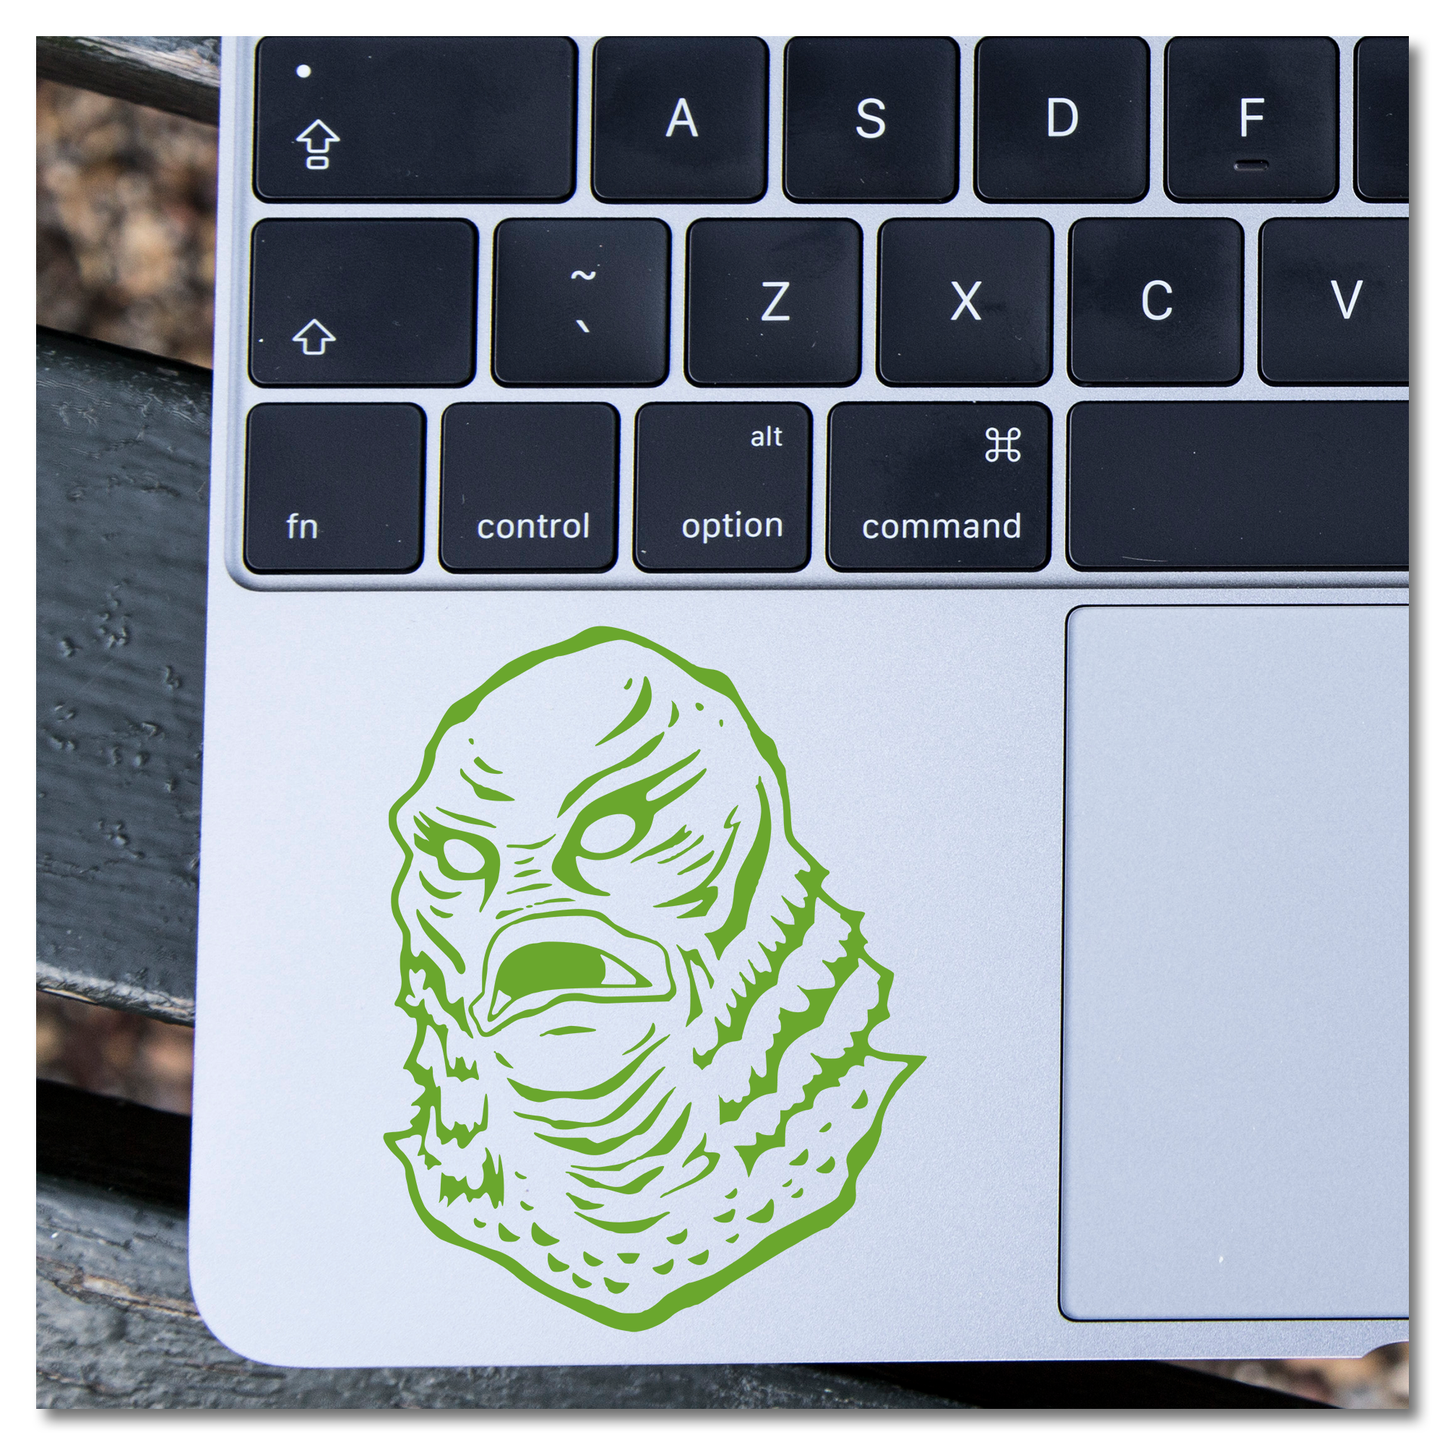 Creature from the Black Lagoon Classic Universal Horror Monster Vinyl Decal Sticker